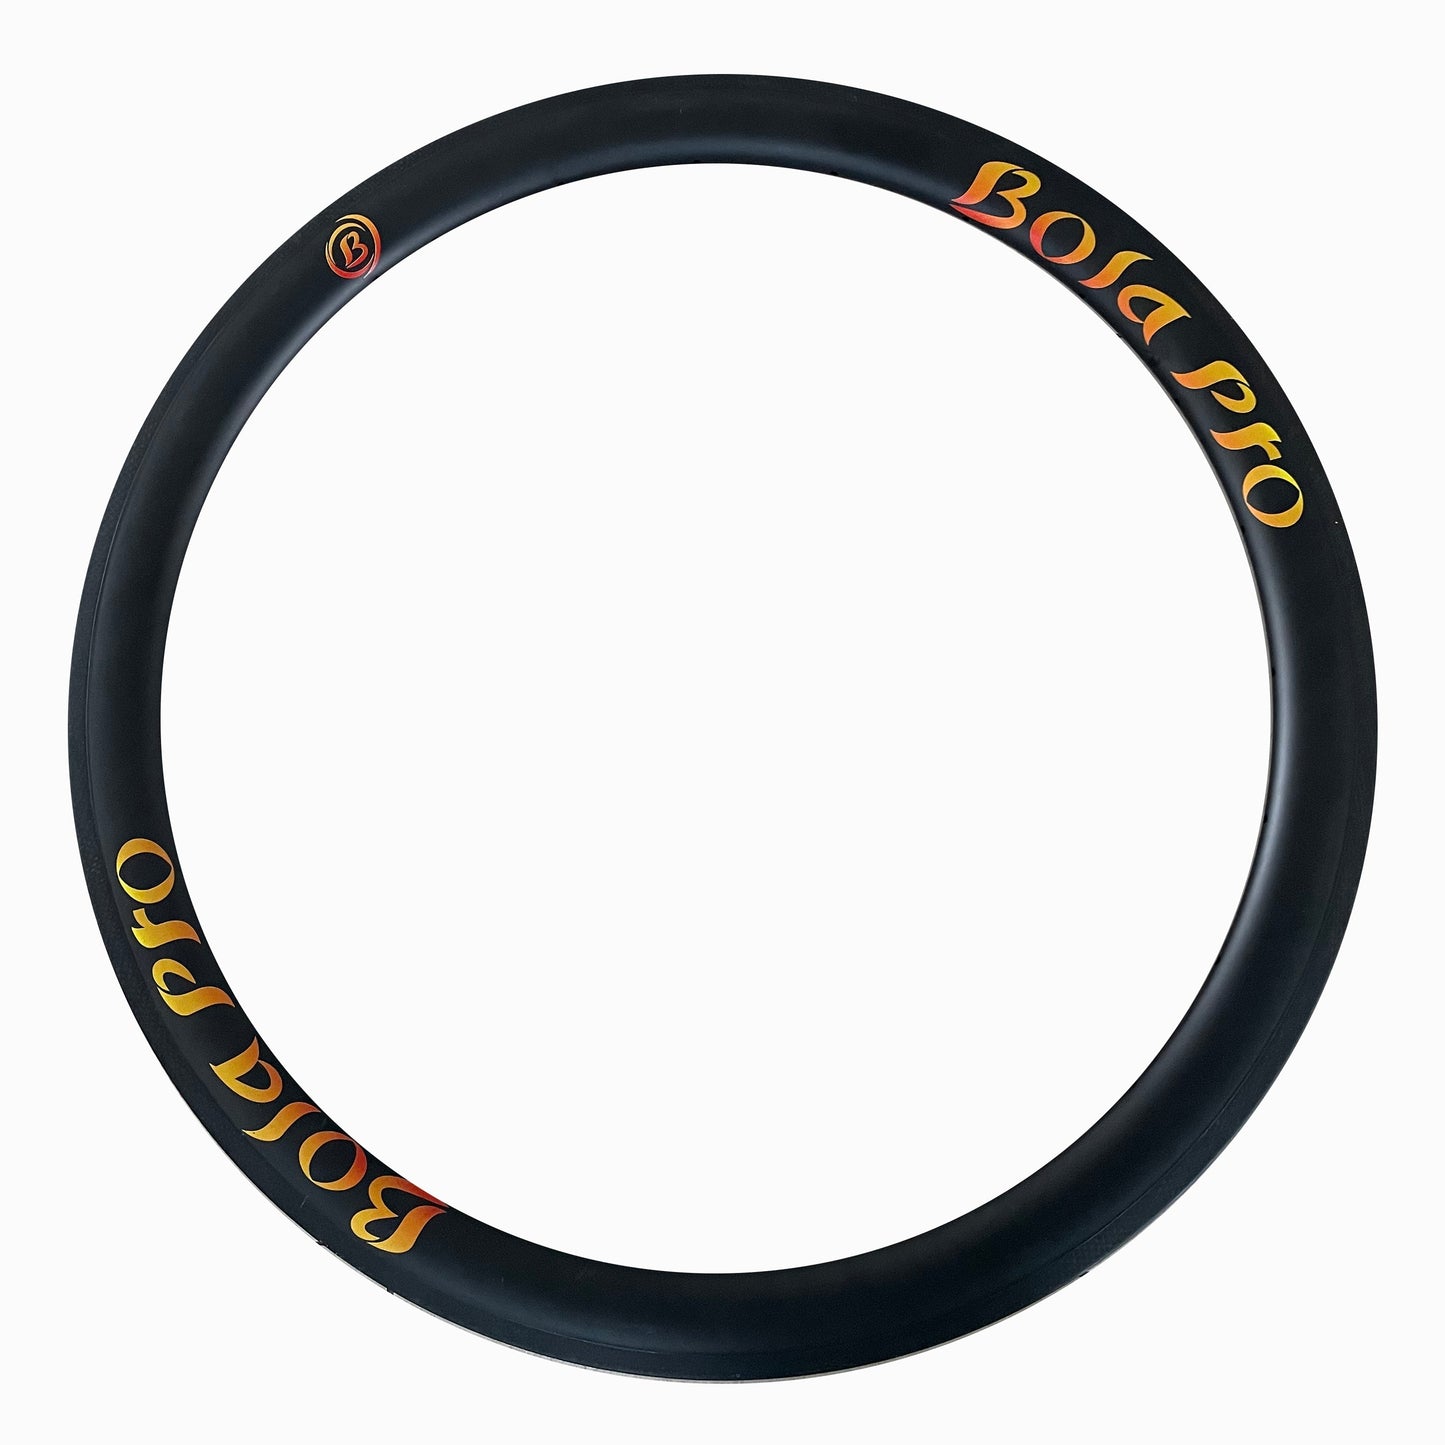 Asymmetric 27.5" feather light hookless carbon tubeless MTB rims 23mm profile 23mm inner wide XC or all mountain Bola